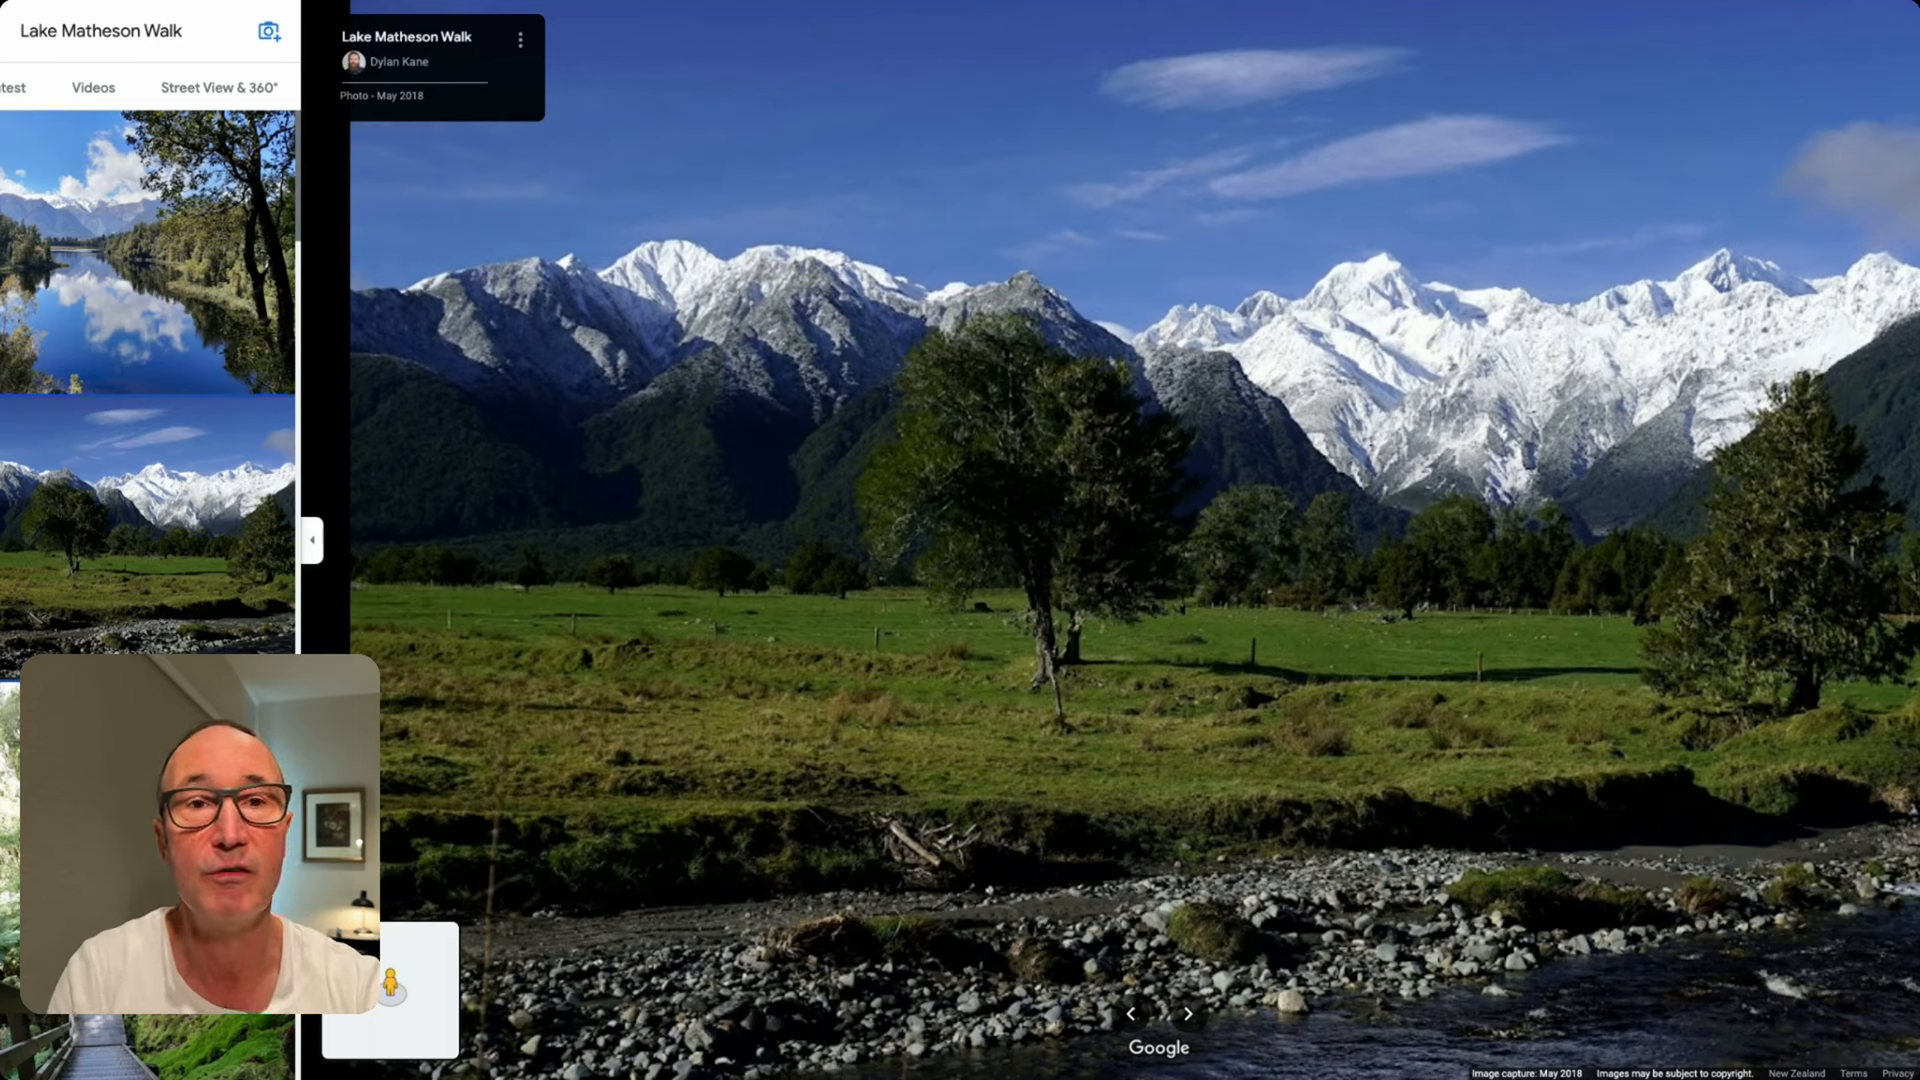 Views from Lake Matheson towards the Southern Alps, Mt. Cook and Mt. Tasman